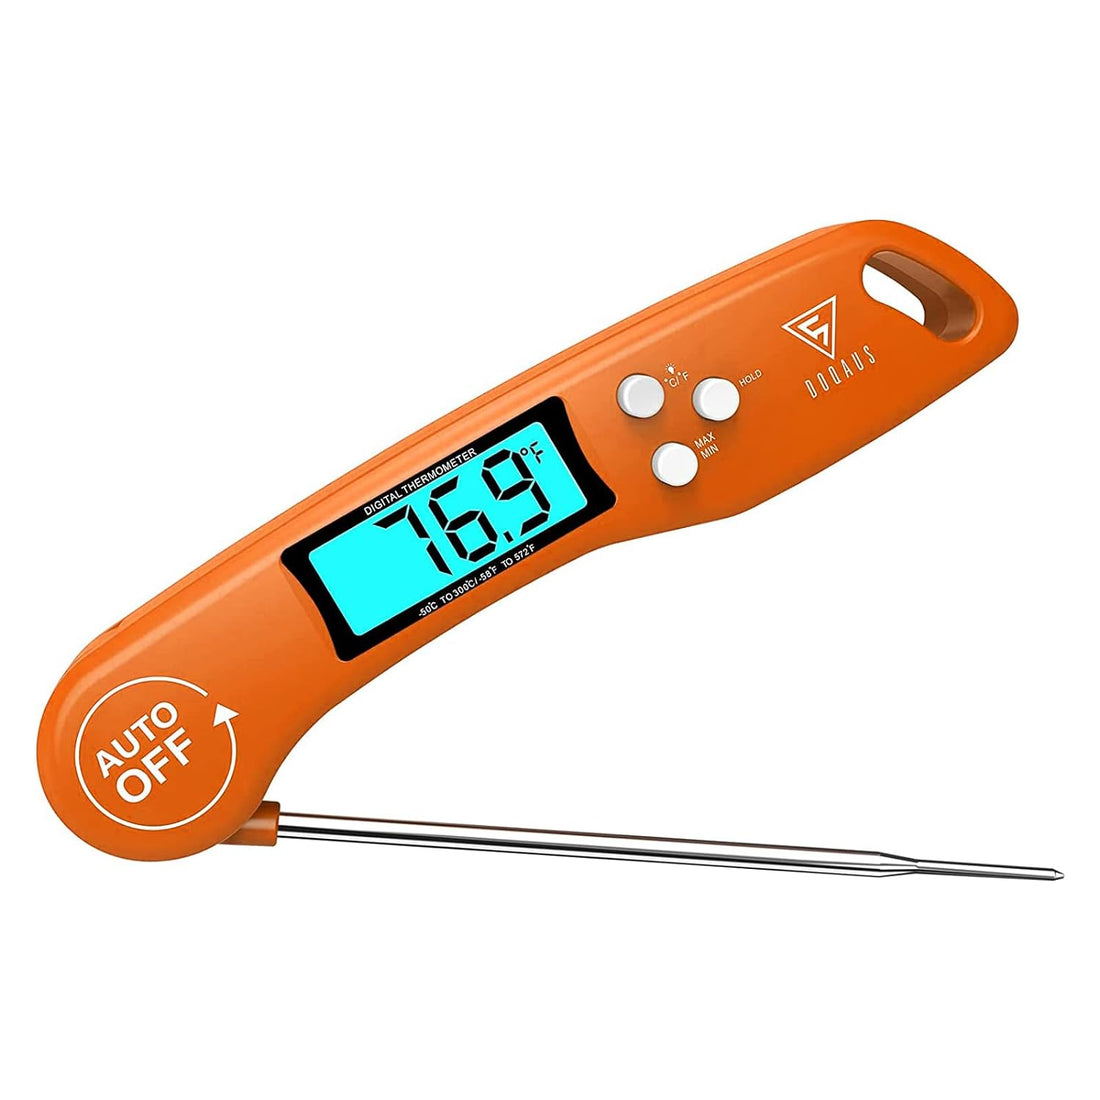 DOQAUS Digital Meat Thermometer, Instant Read Food Thermometer for Cooking, Kitchen Thermometer Probe with Backlit & Reversible Display, Cooking Thermometer Temperature for Turkey Candy